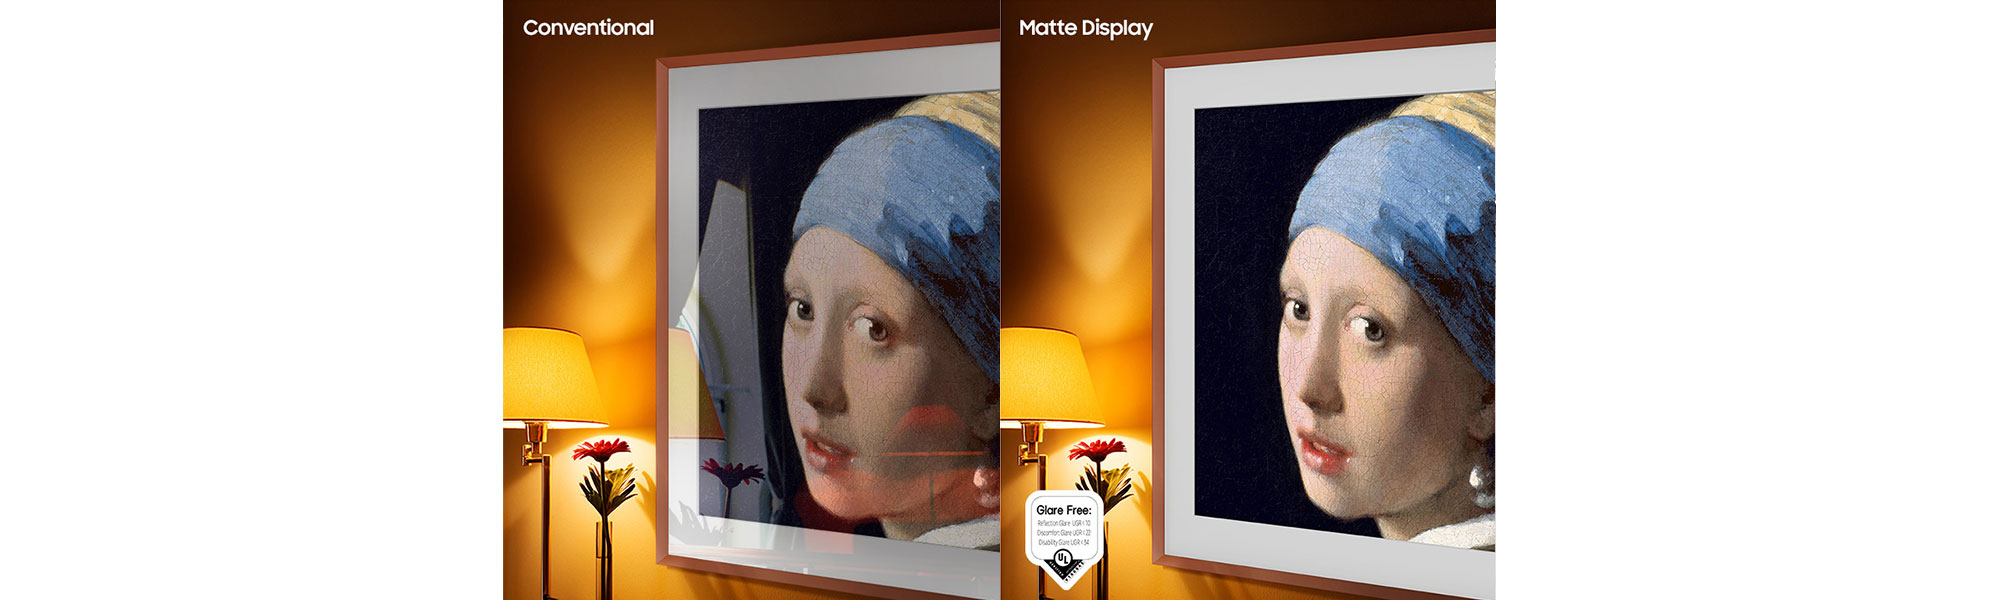 Split image showing art on TV with and without reflection